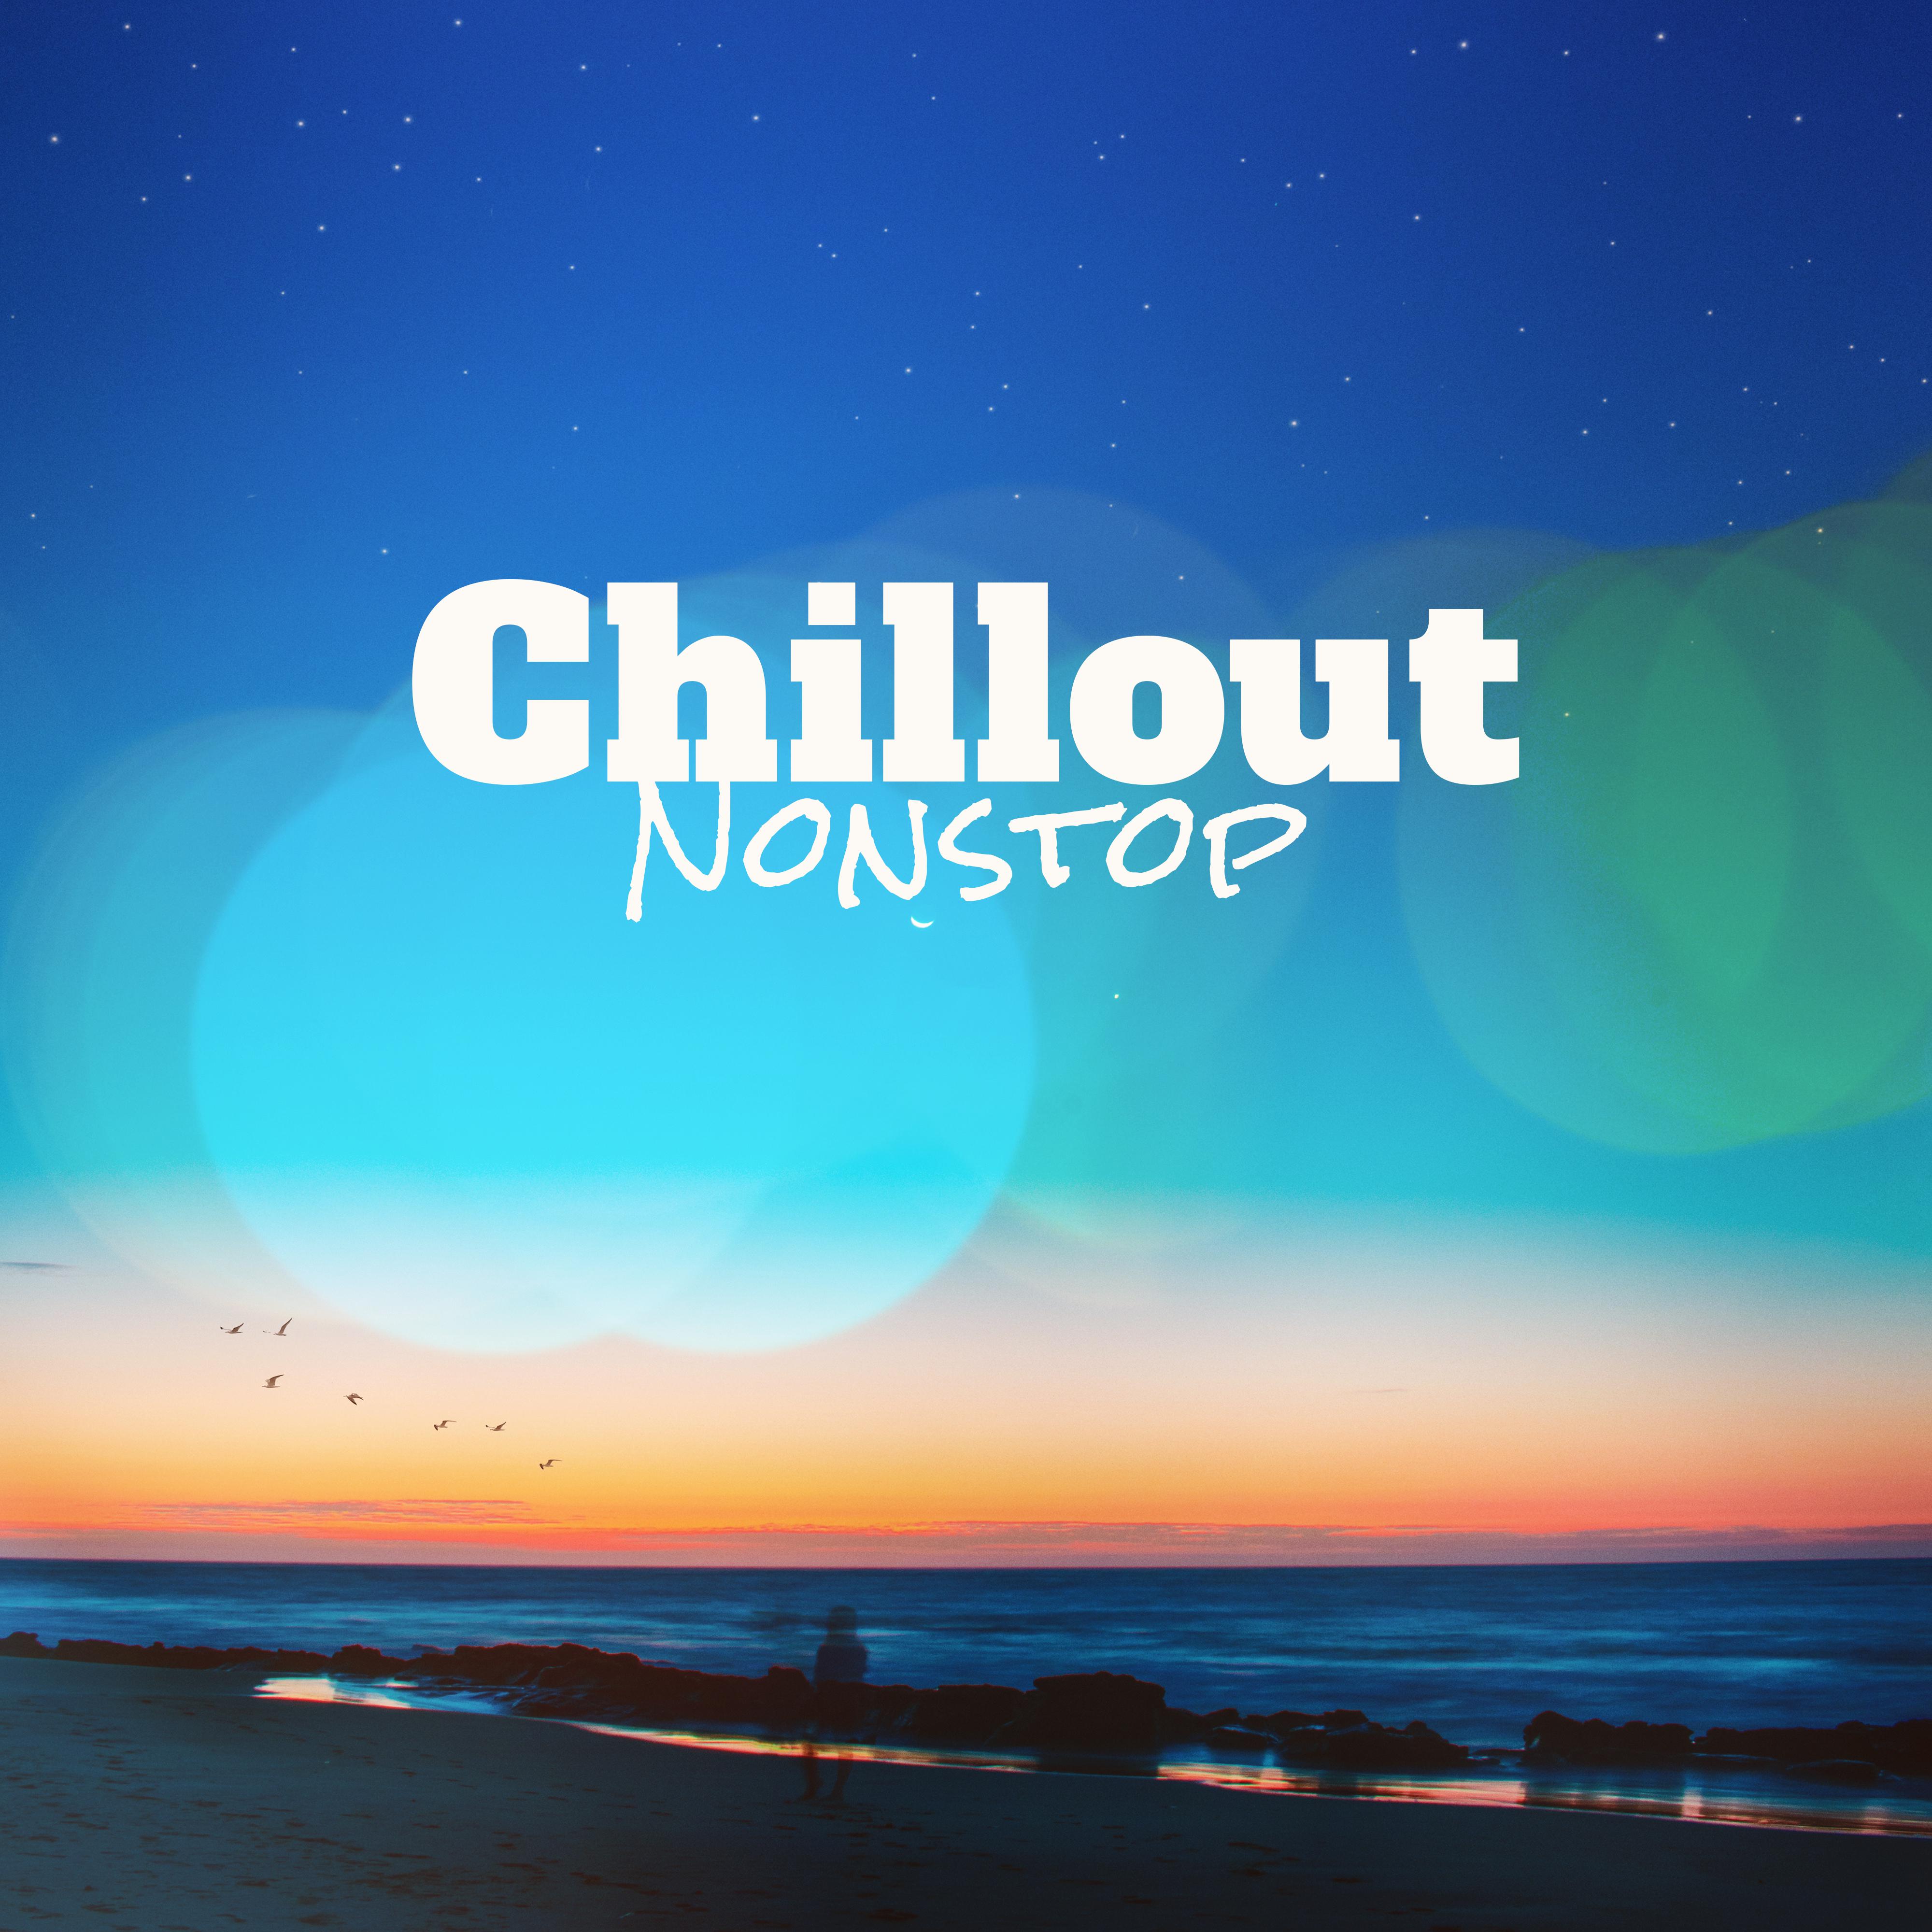 Chillout Nonstop – Chill Out 2018